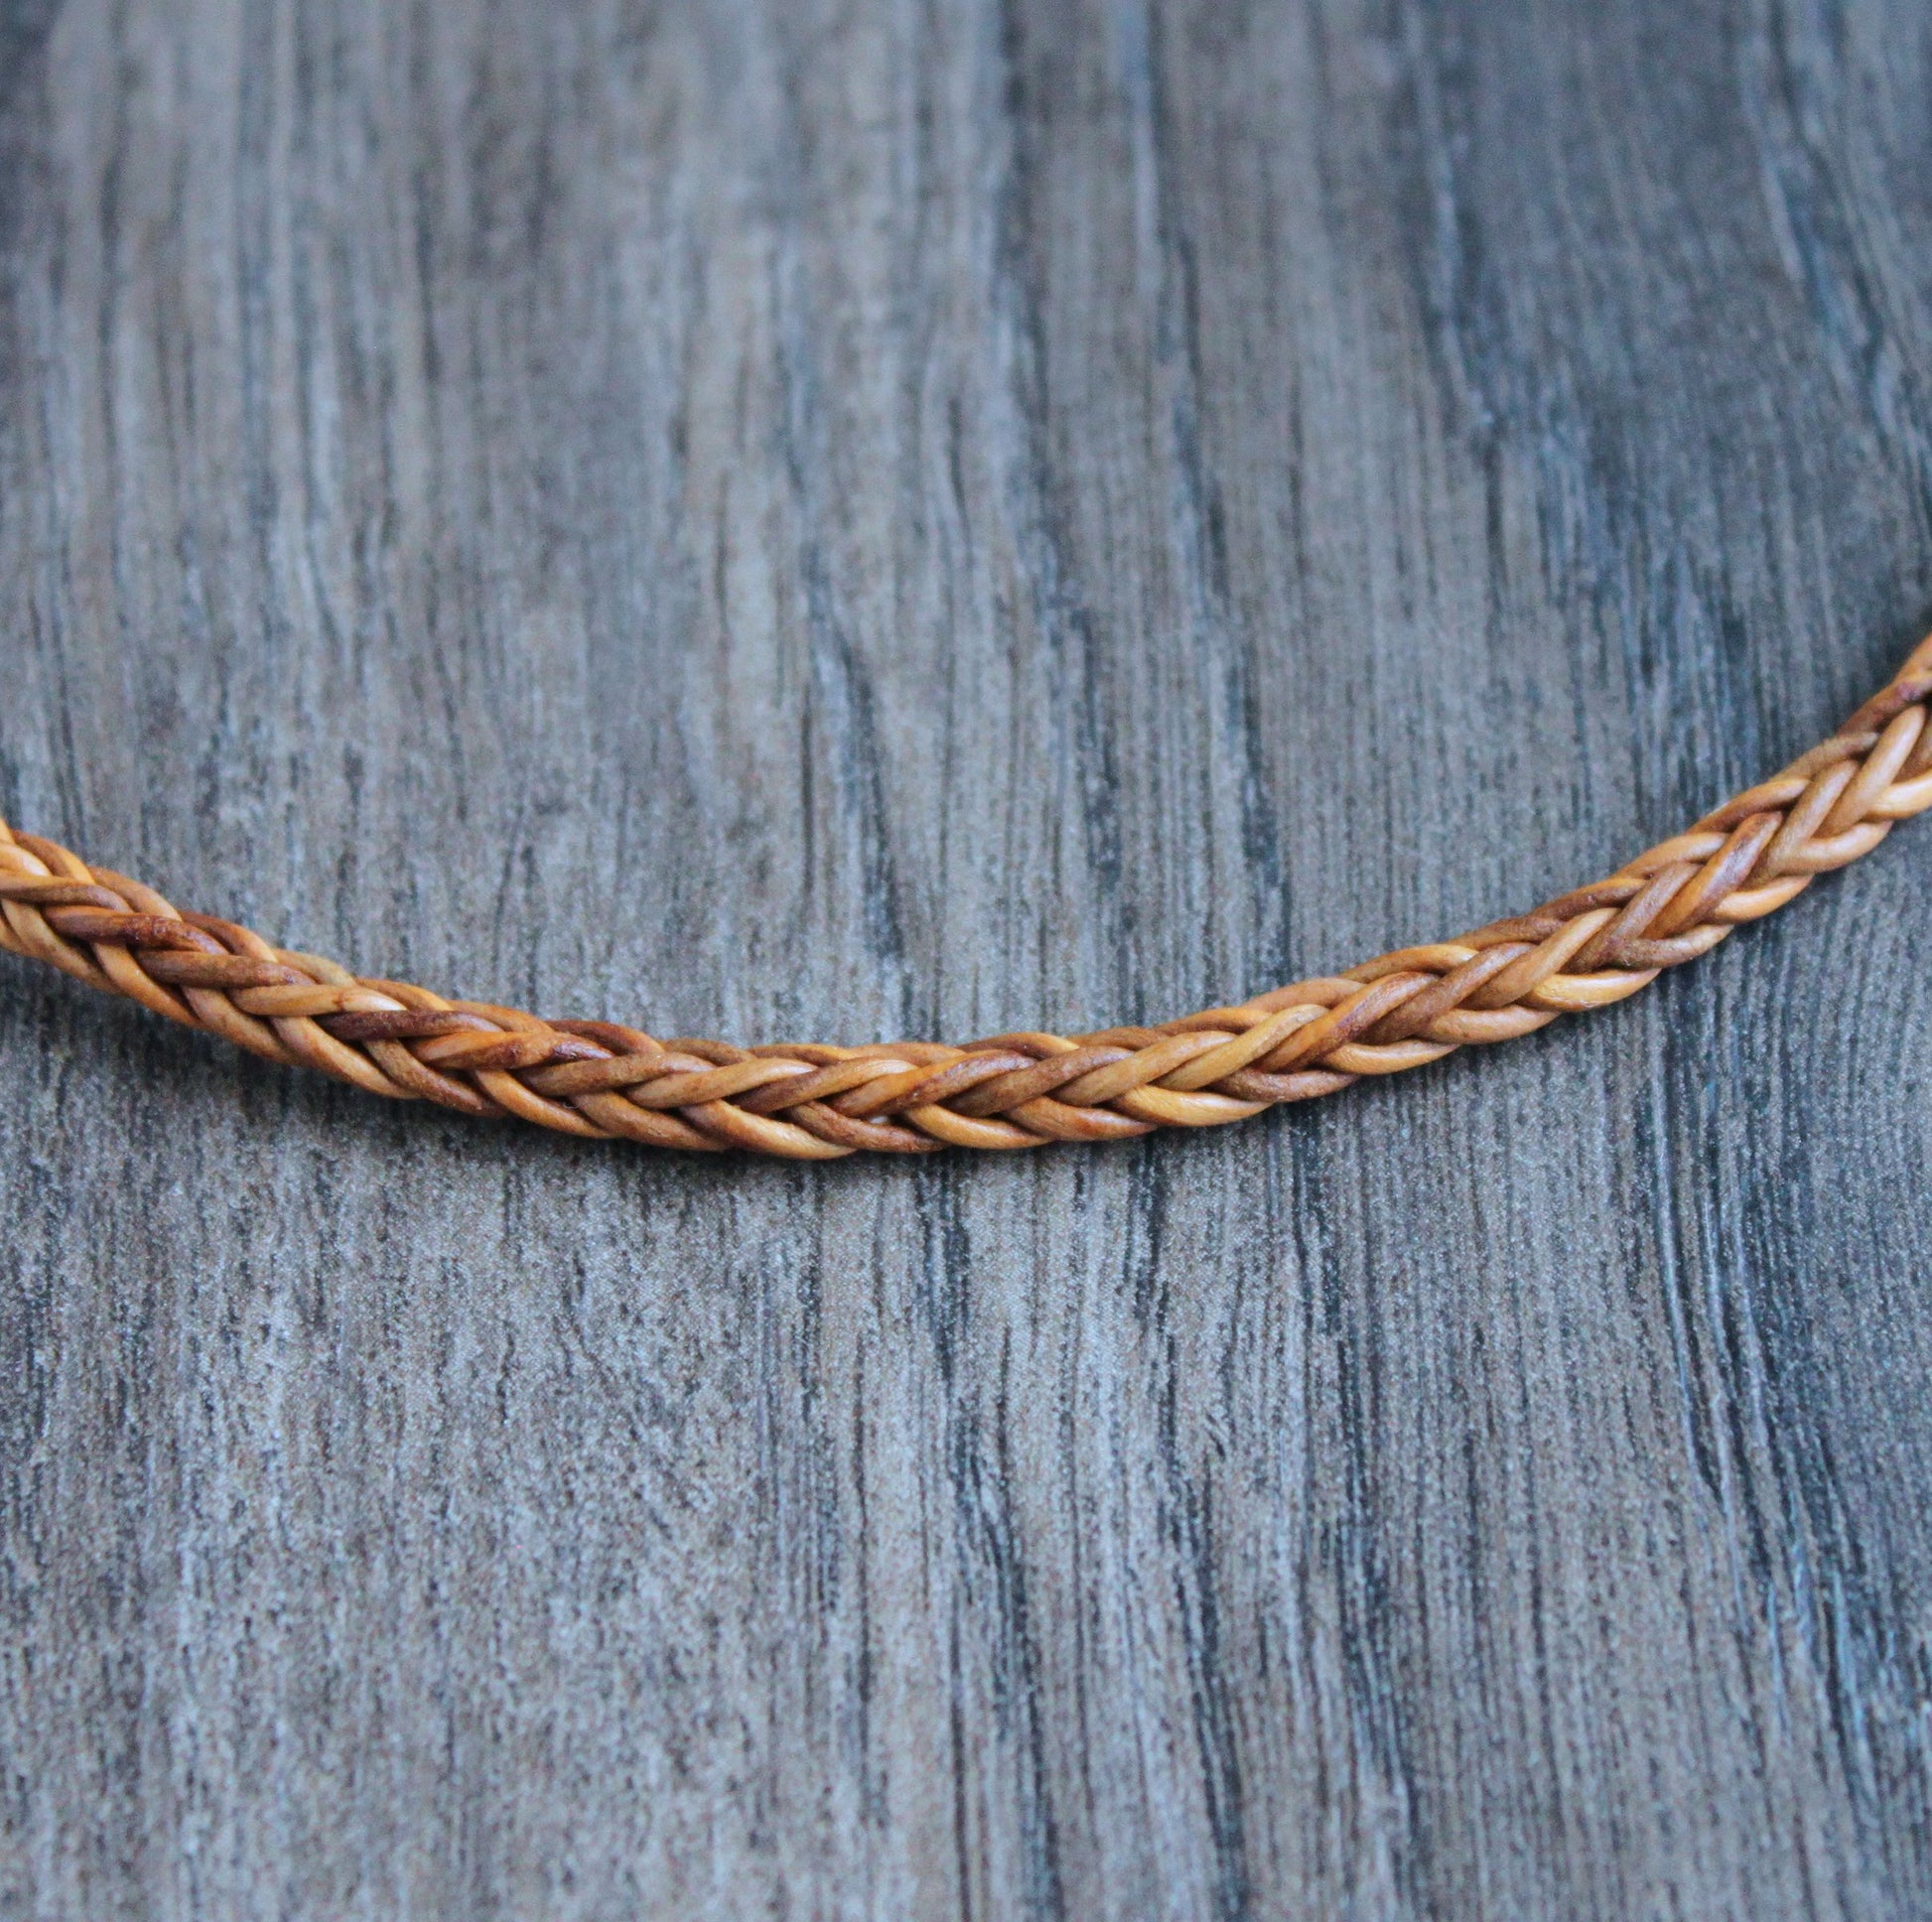 braided leather chain